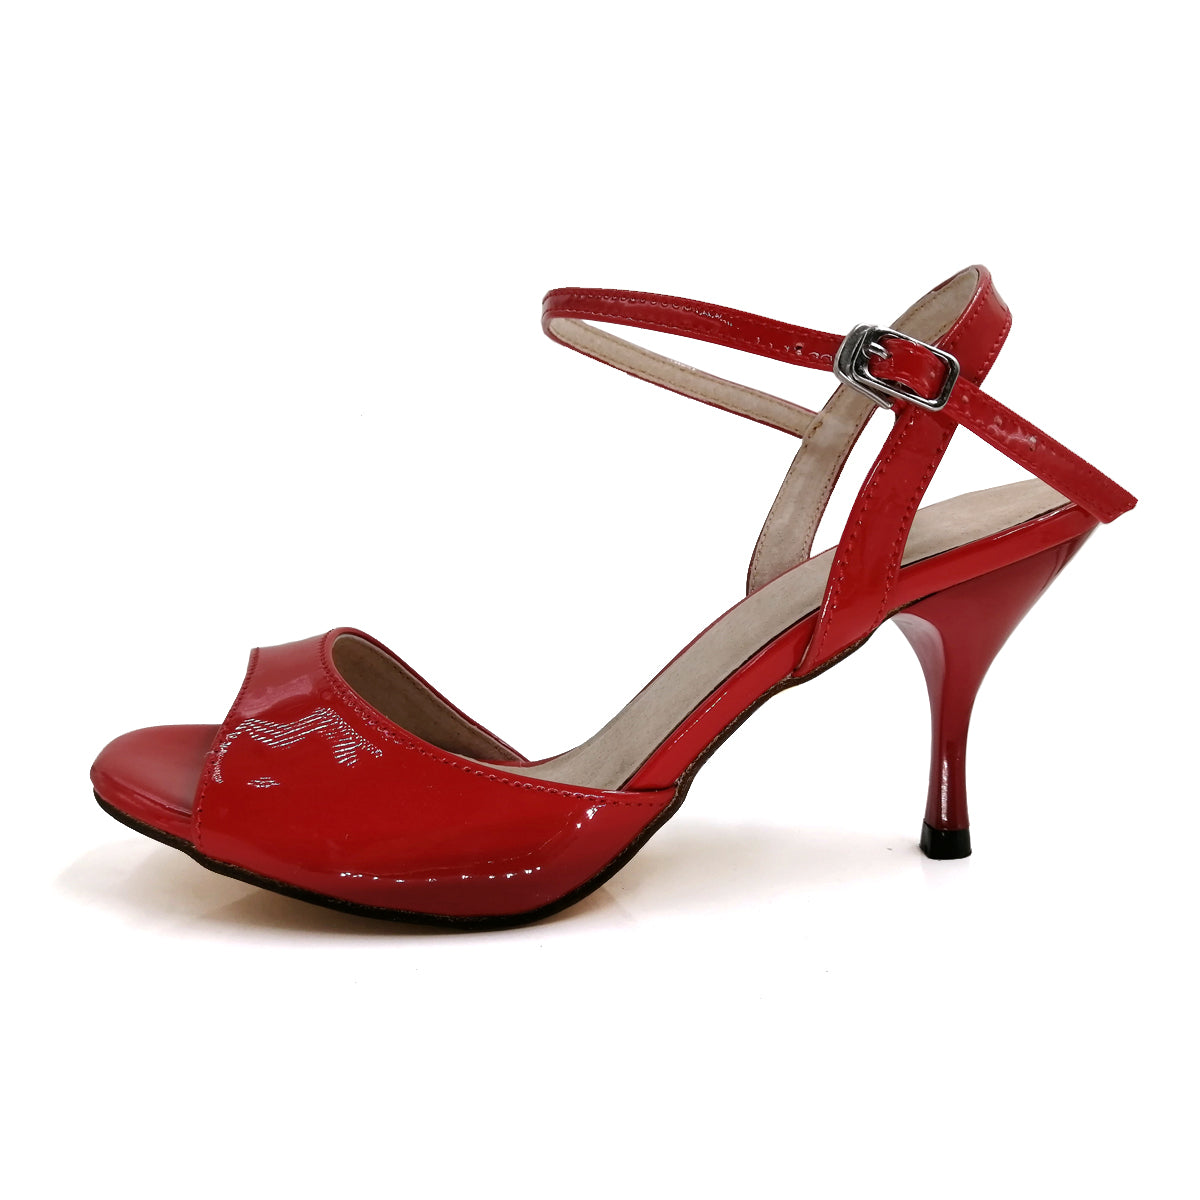 Pro Dancer Women's High Heel Tango Shoes Dance Sandals with Leather Sole in Red (PD-9007B)3